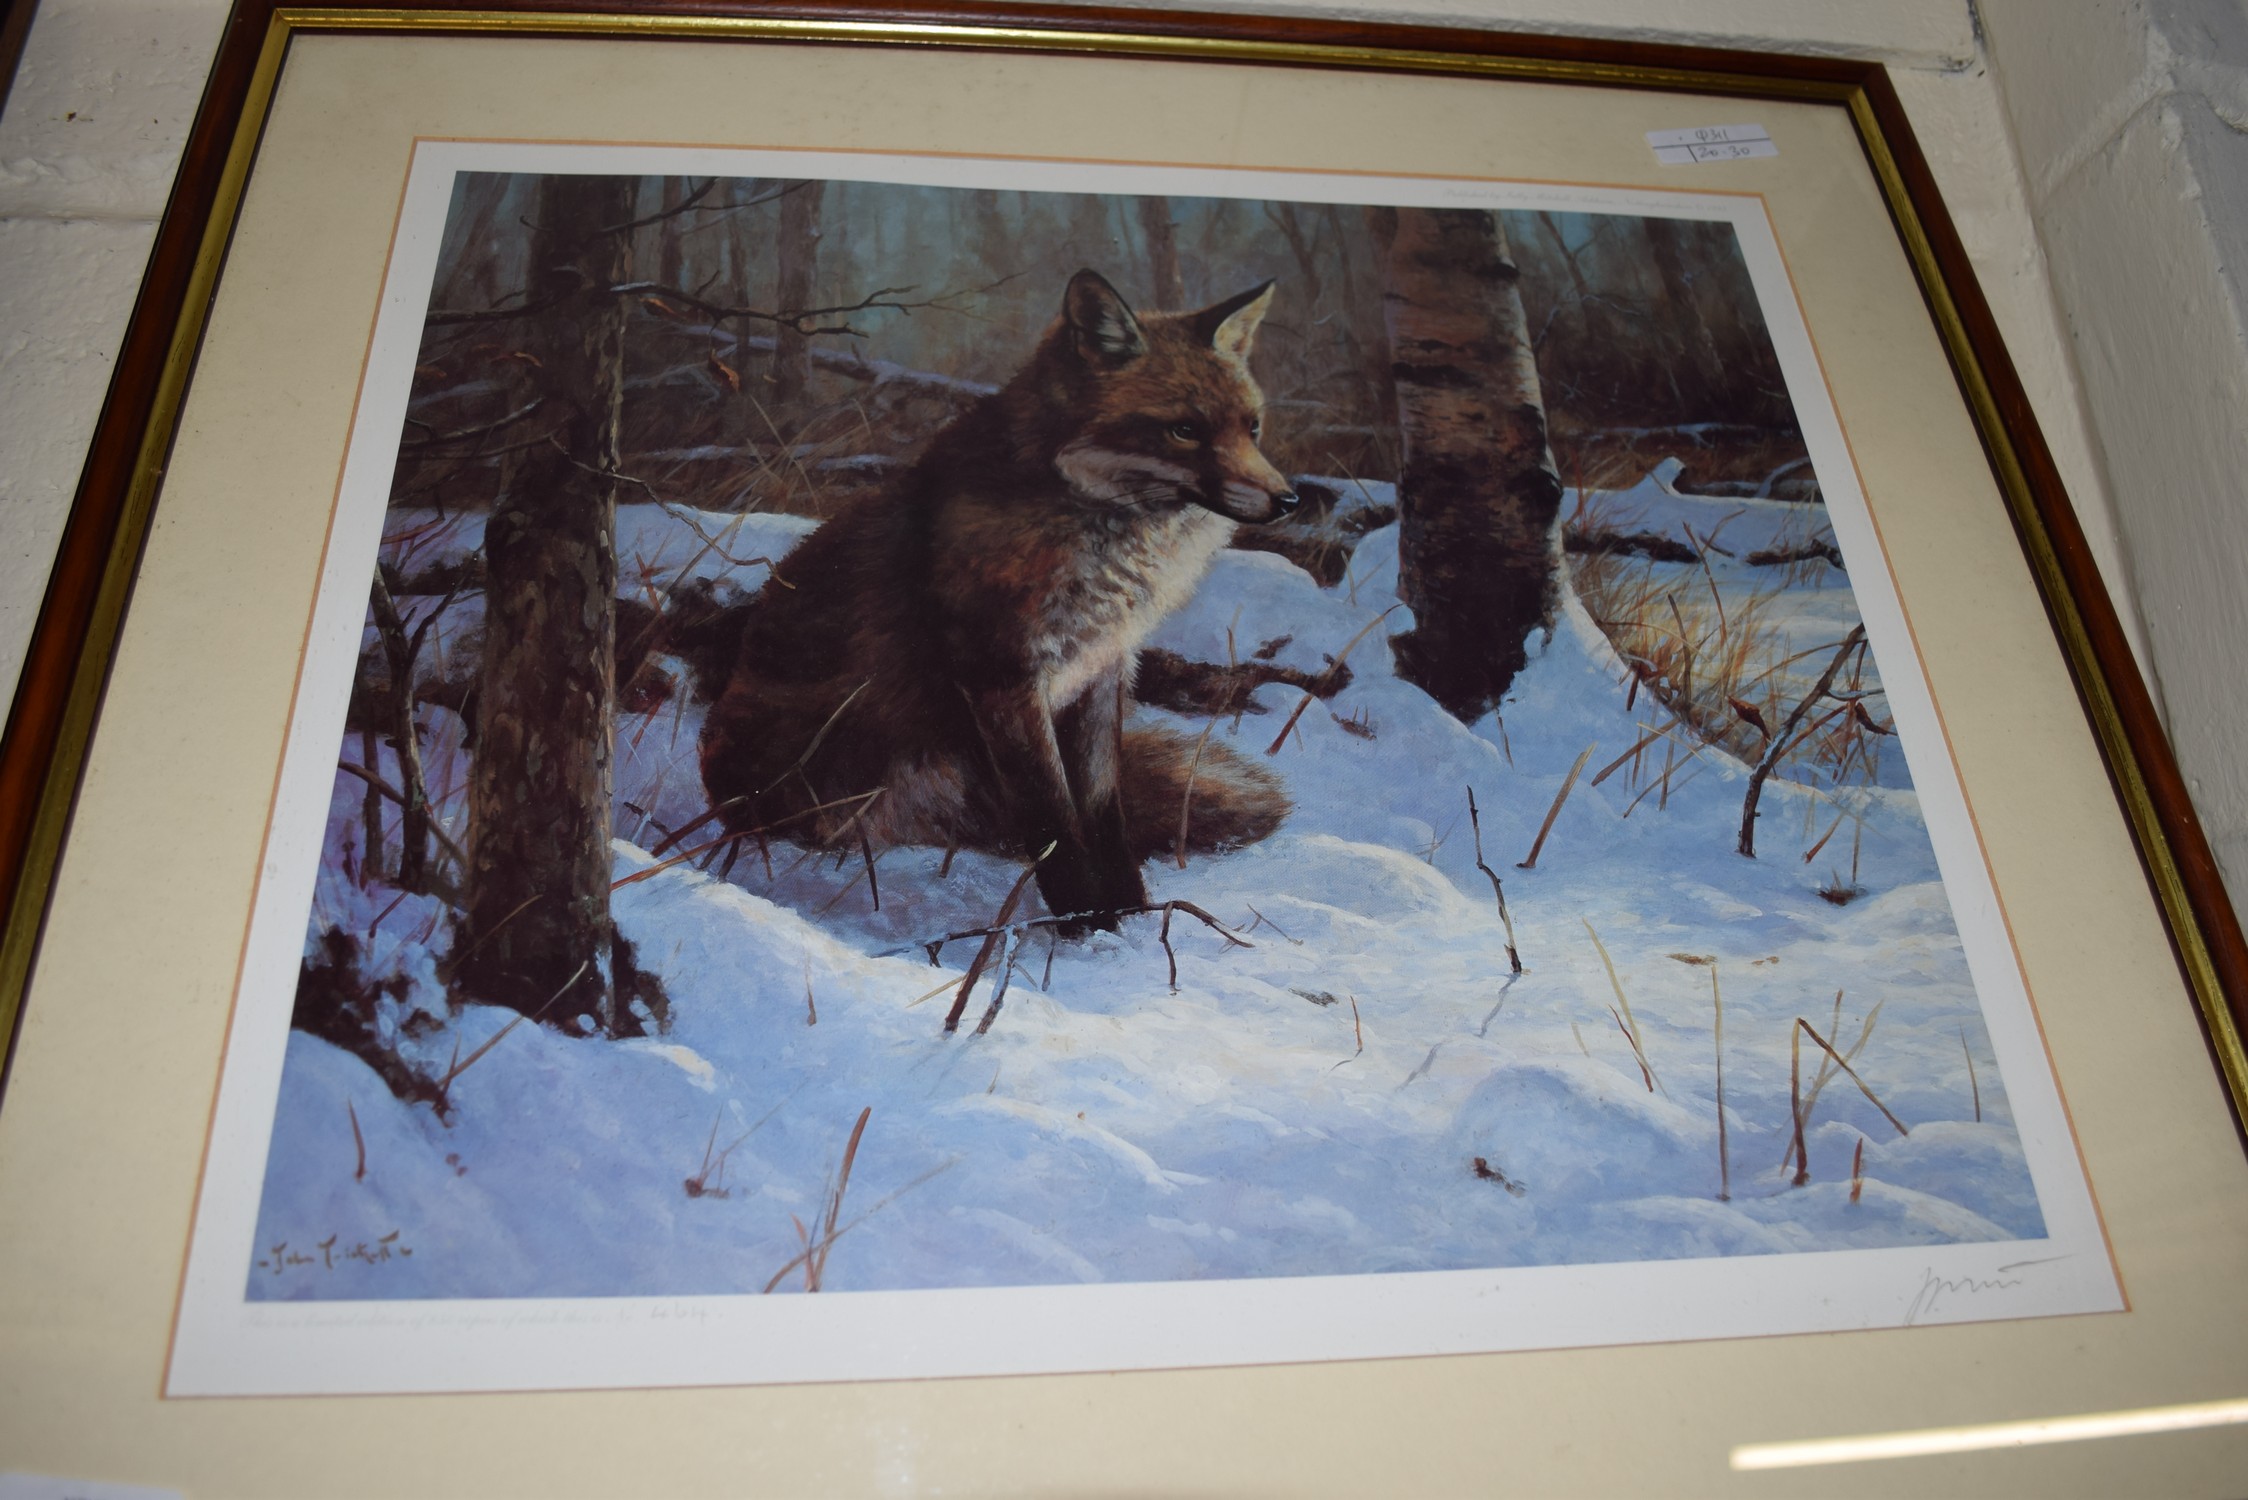 JOHN TRICKETT, COLOURED PRINT, FOX IN SNOW, LTD ED 464/850, SIGNED IN PENCIL LOWER RIGHT, FRAMED AND